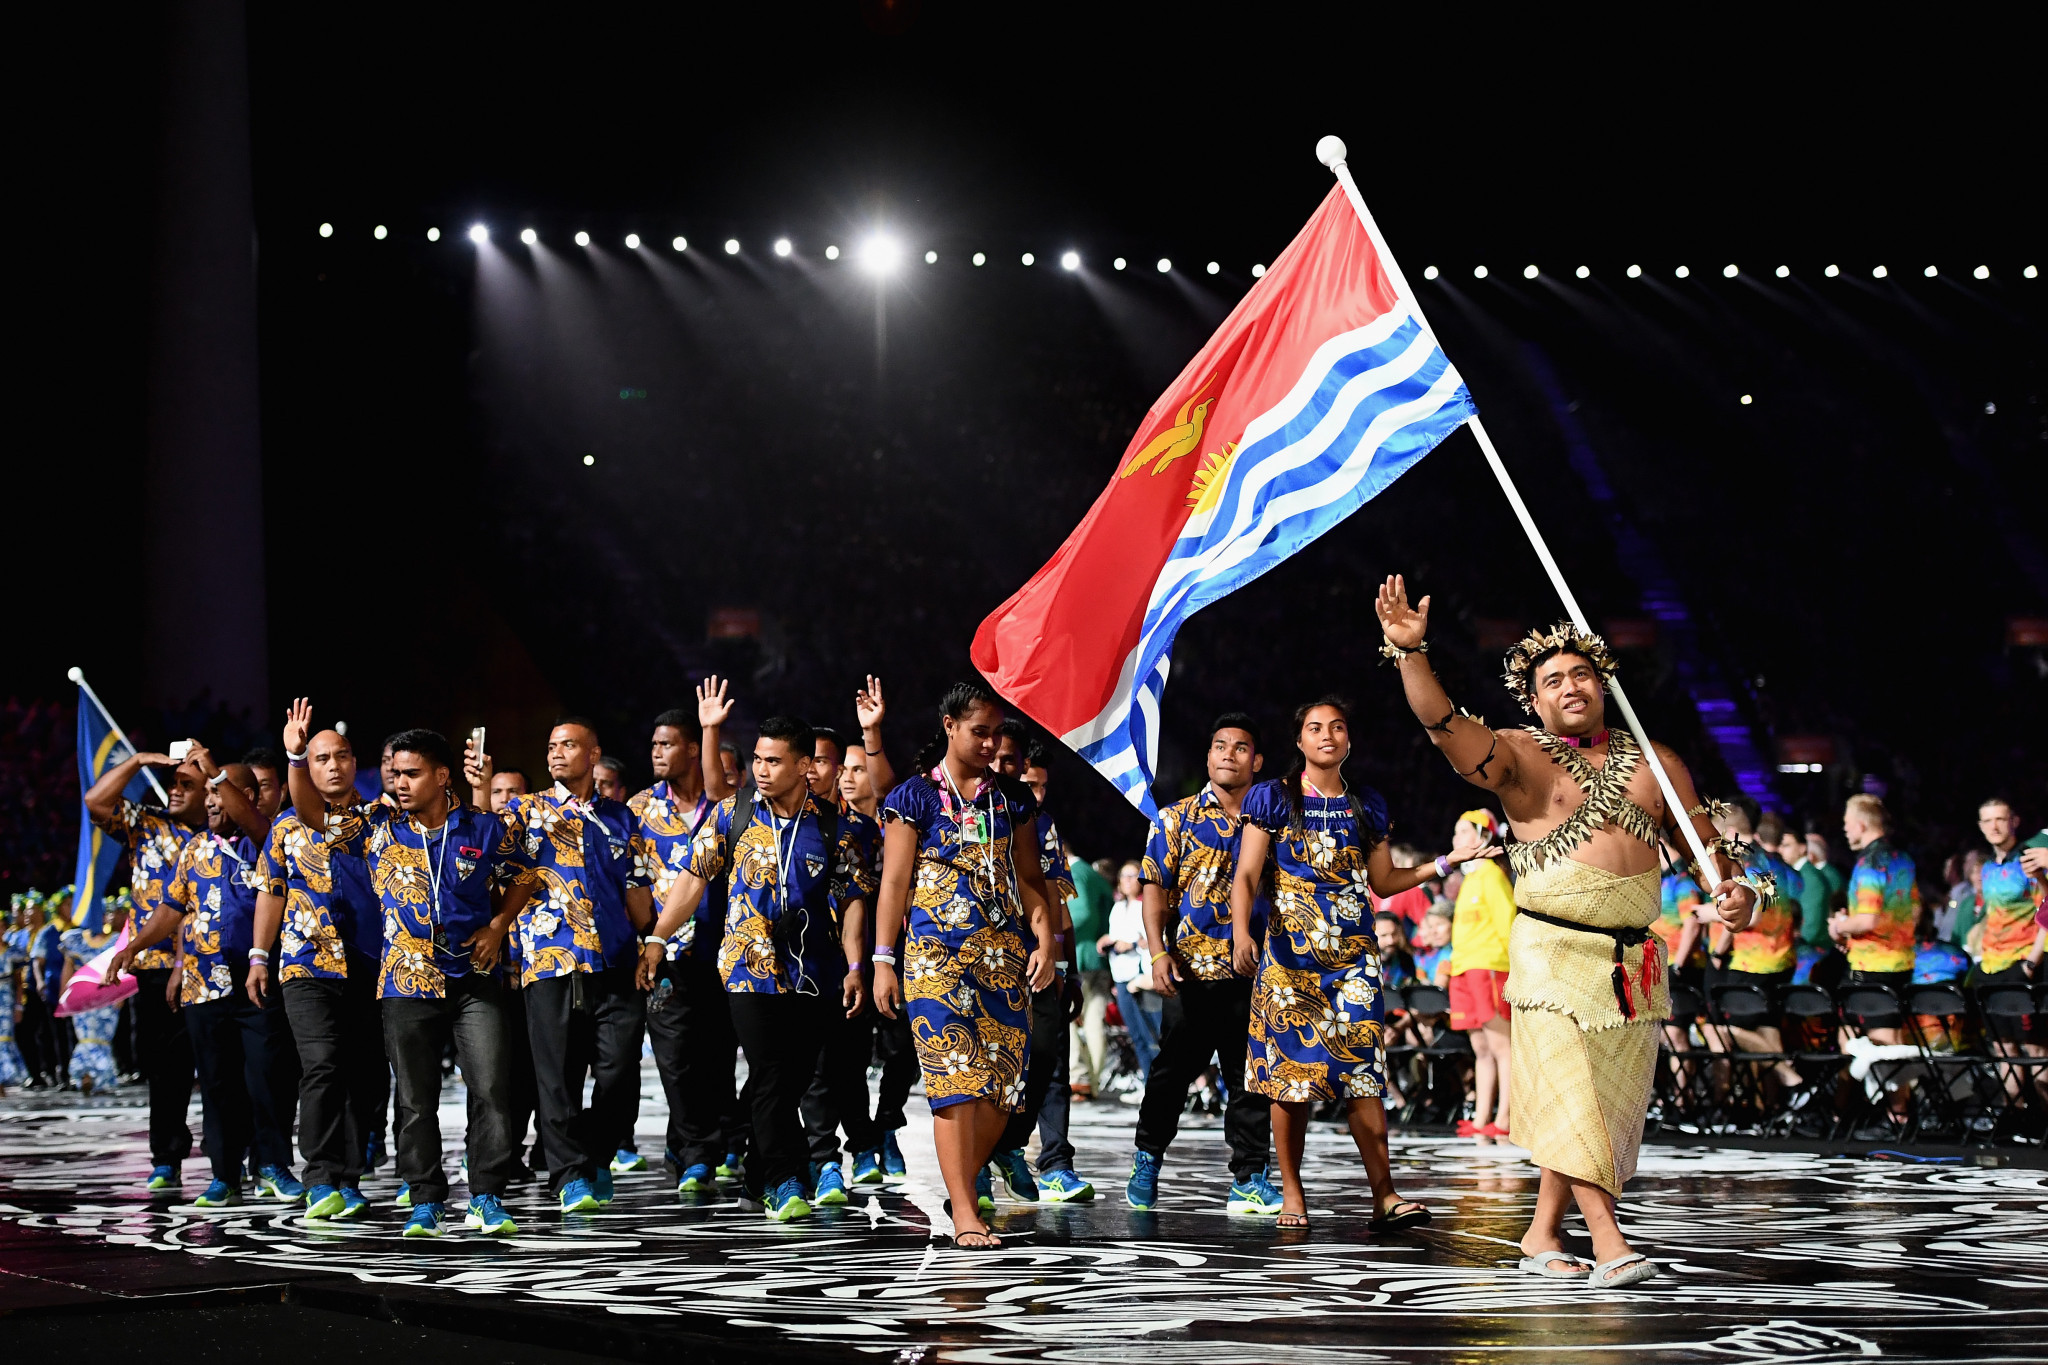 Kiribati National Olympic Committee secures funding for boxers to attend training camp in Melbourne